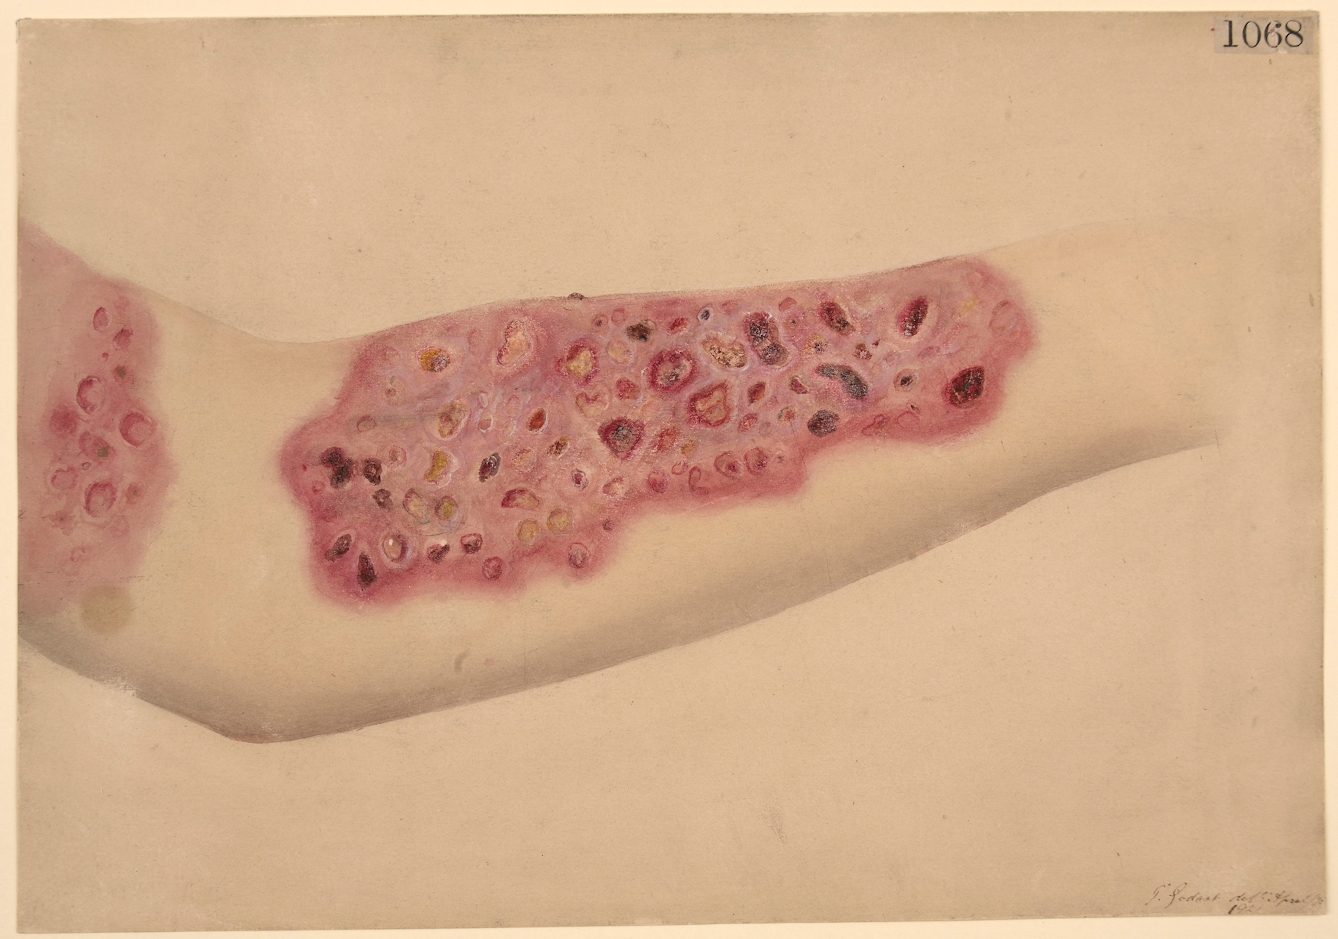 Watercolour drawing showing ulceration of the forearm with lots of red sores.